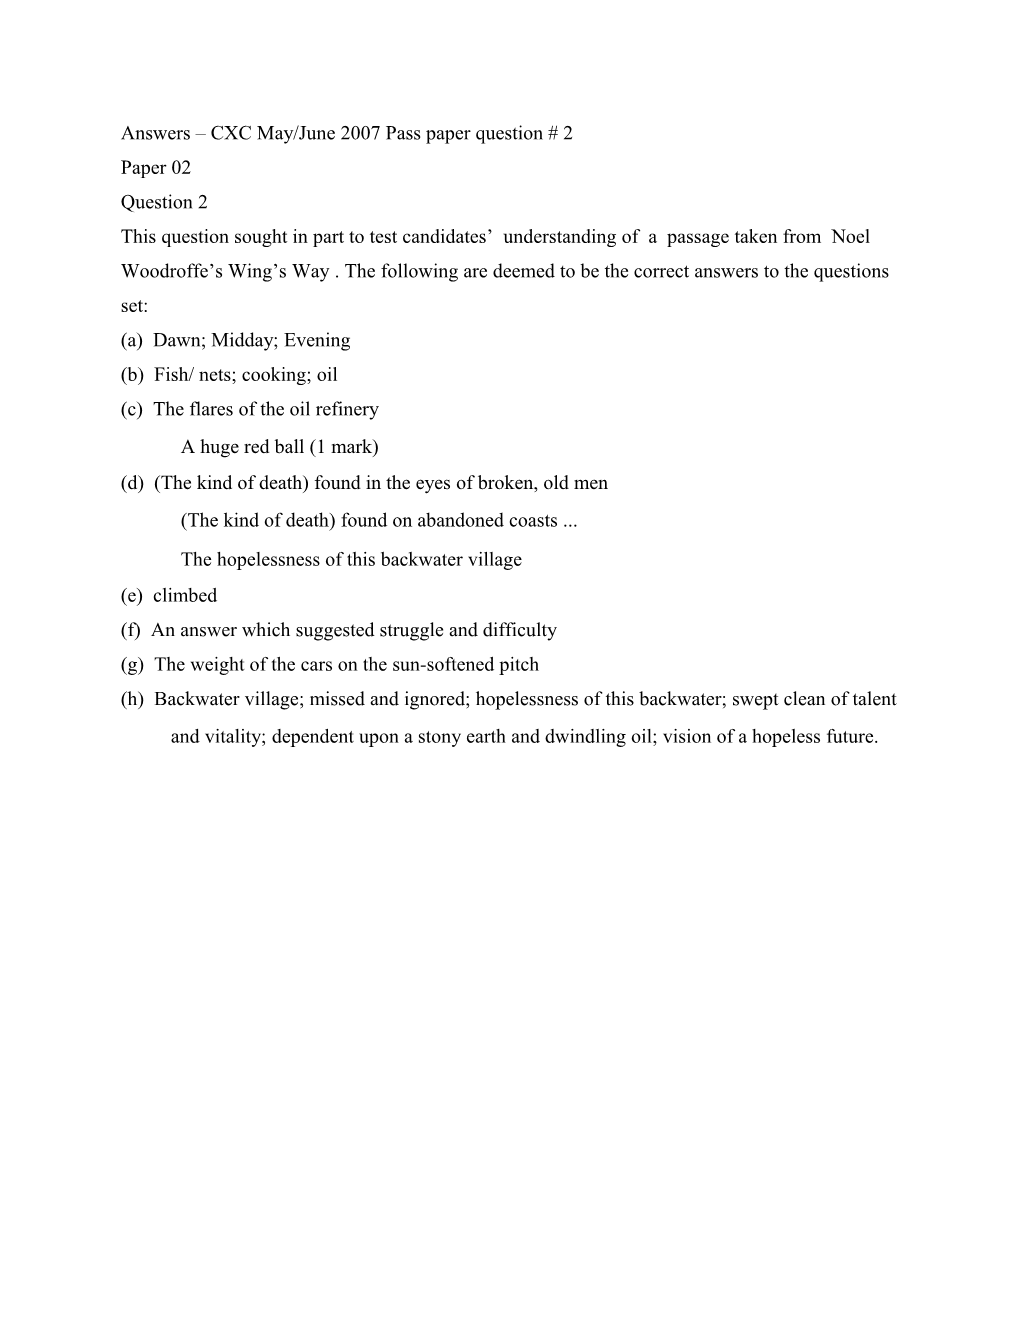 Answers CXC May/June 2007 Pass Paper Question # 2